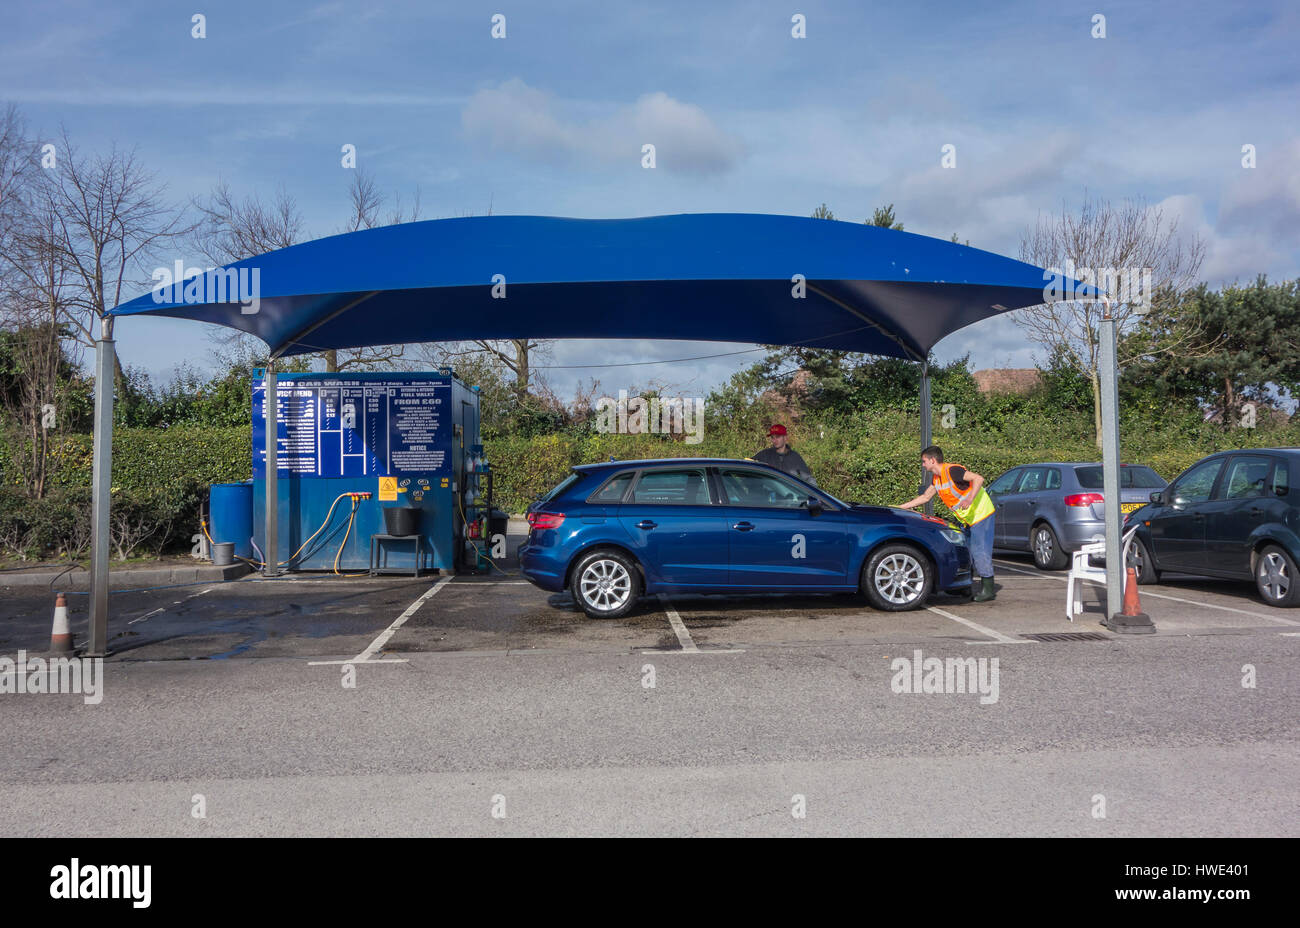 A Car Being cleaned at a Hand Car Wash  Unit in a Car Park in Poole, Dorset, UK Stock Photo